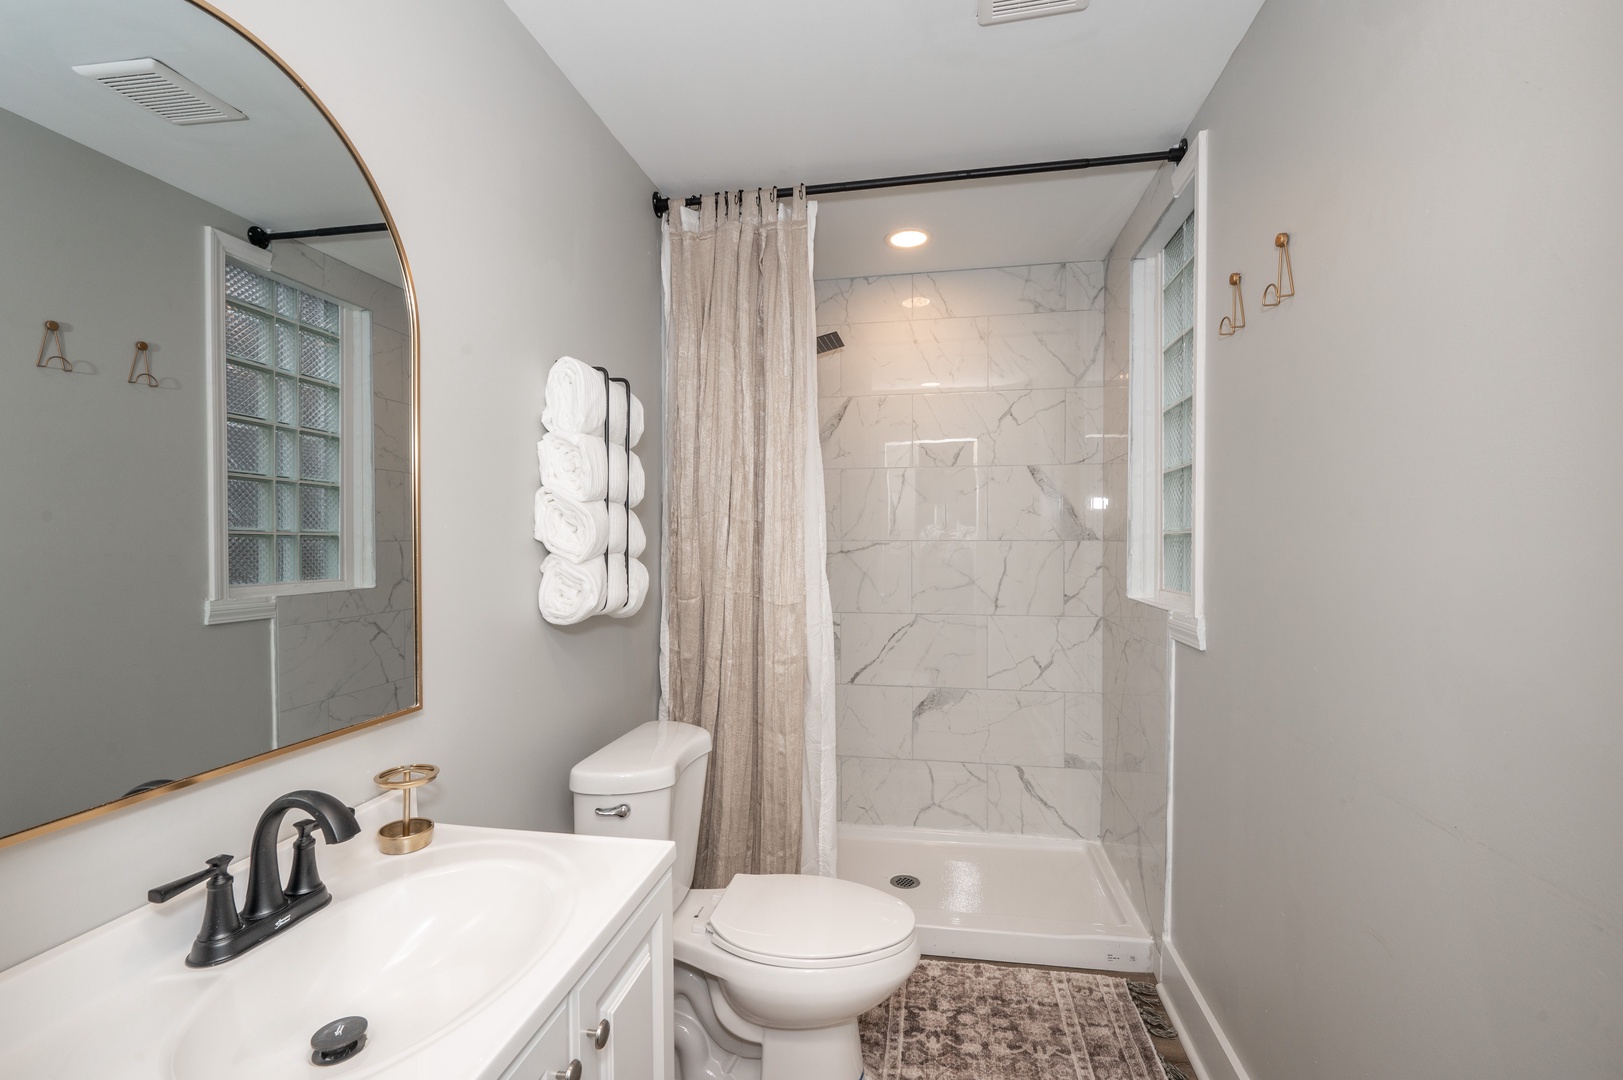 The full bathroom offers a walk-in shower & chic finishes